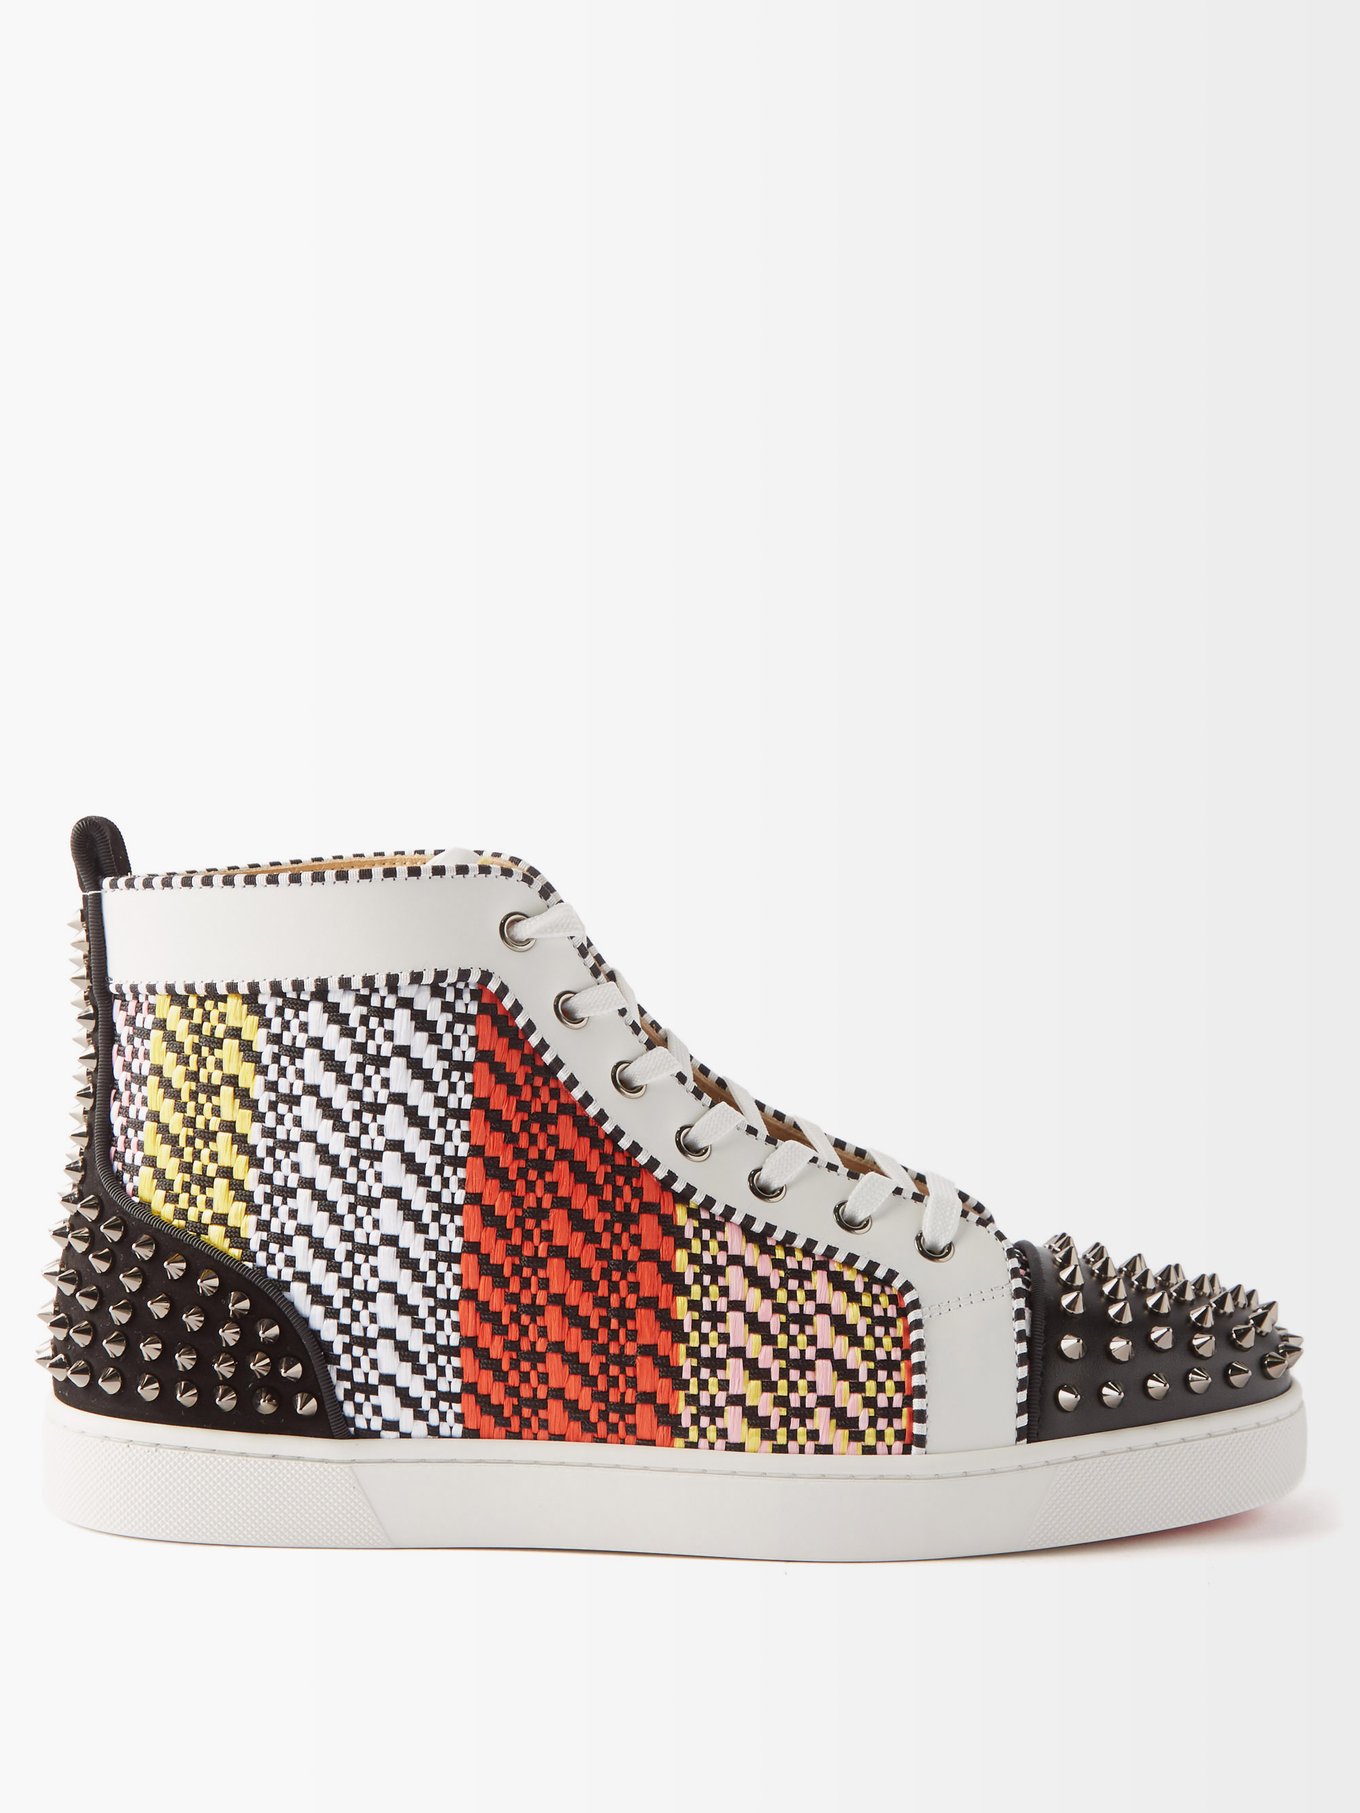 Christian Louboutins Trainers Store, SAVE 33% 